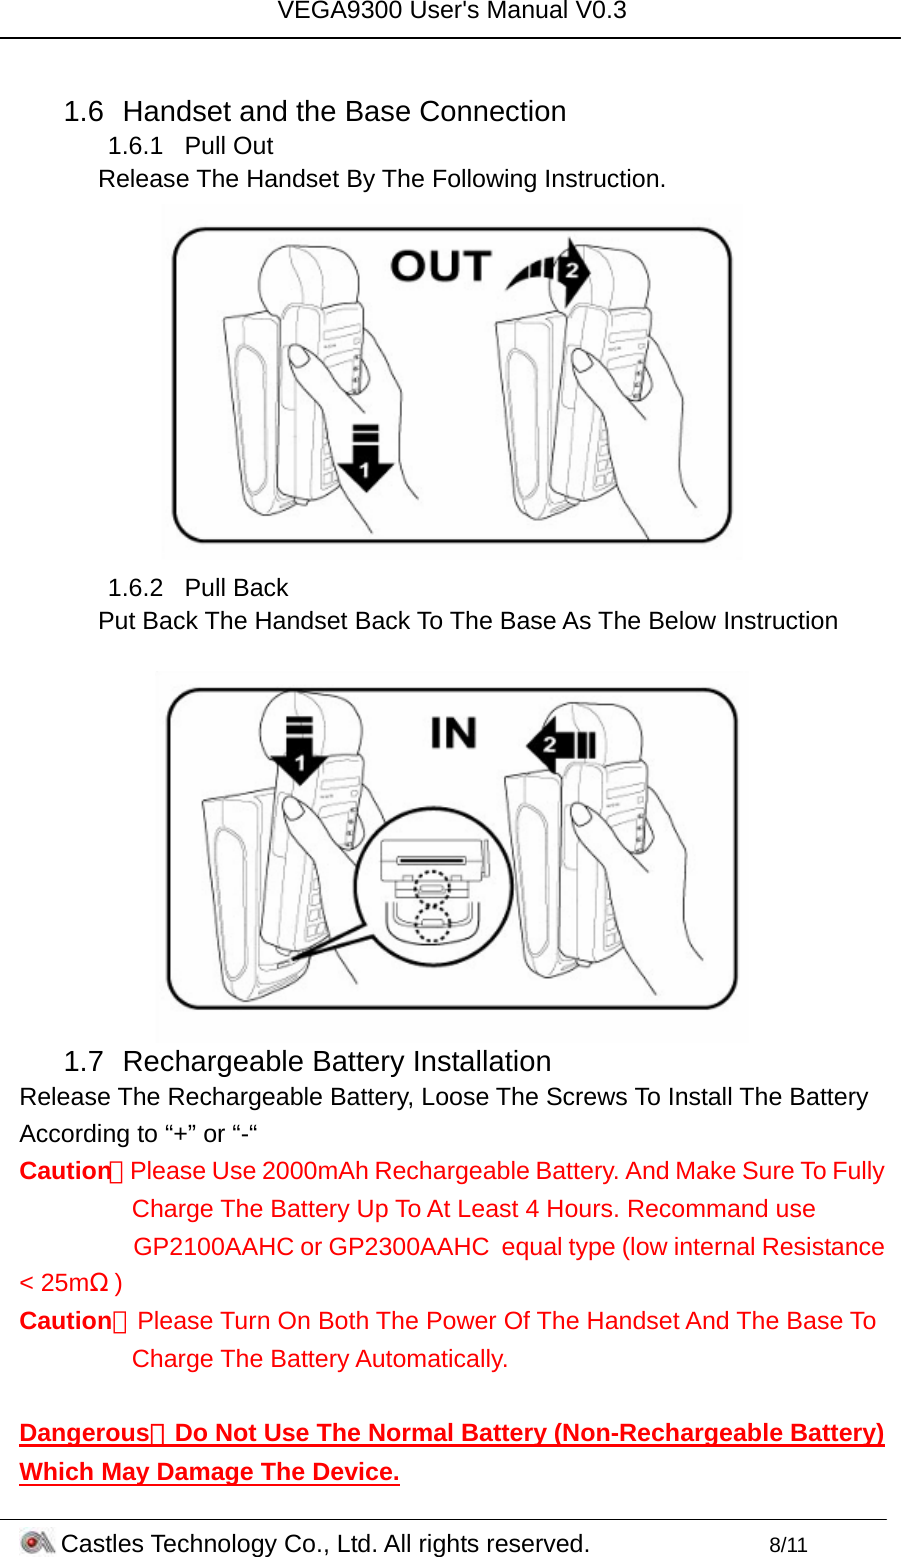 VEGA9300 User&apos;s Manual V0.3 Castles Technology Co., Ltd. All rights reserved.        8/11  1.6  Handset and the Base Connection 1.6.1 Pull Out Release The Handset By The Following Instruction.  1.6.2 Pull Back Put Back The Handset Back To The Base As The Below Instruction   1.7  Rechargeable Battery Installation Release The Rechargeable Battery, Loose The Screws To Install The Battery According to “+” or “-“ Caution：Please Use 2000mAh Rechargeable Battery. And Make Sure To Fully             Charge The Battery Up To At Least 4 Hours. Recommand use        GP2100AAHC or GP2300AAHC  equal type (low internal Resistance &lt; 25mΩ) Caution：Please Turn On Both The Power Of The Handset And The Base To Charge The Battery Automatically.   Dangerous：Do Not Use The Normal Battery (Non-Rechargeable Battery) Which May Damage The Device. 